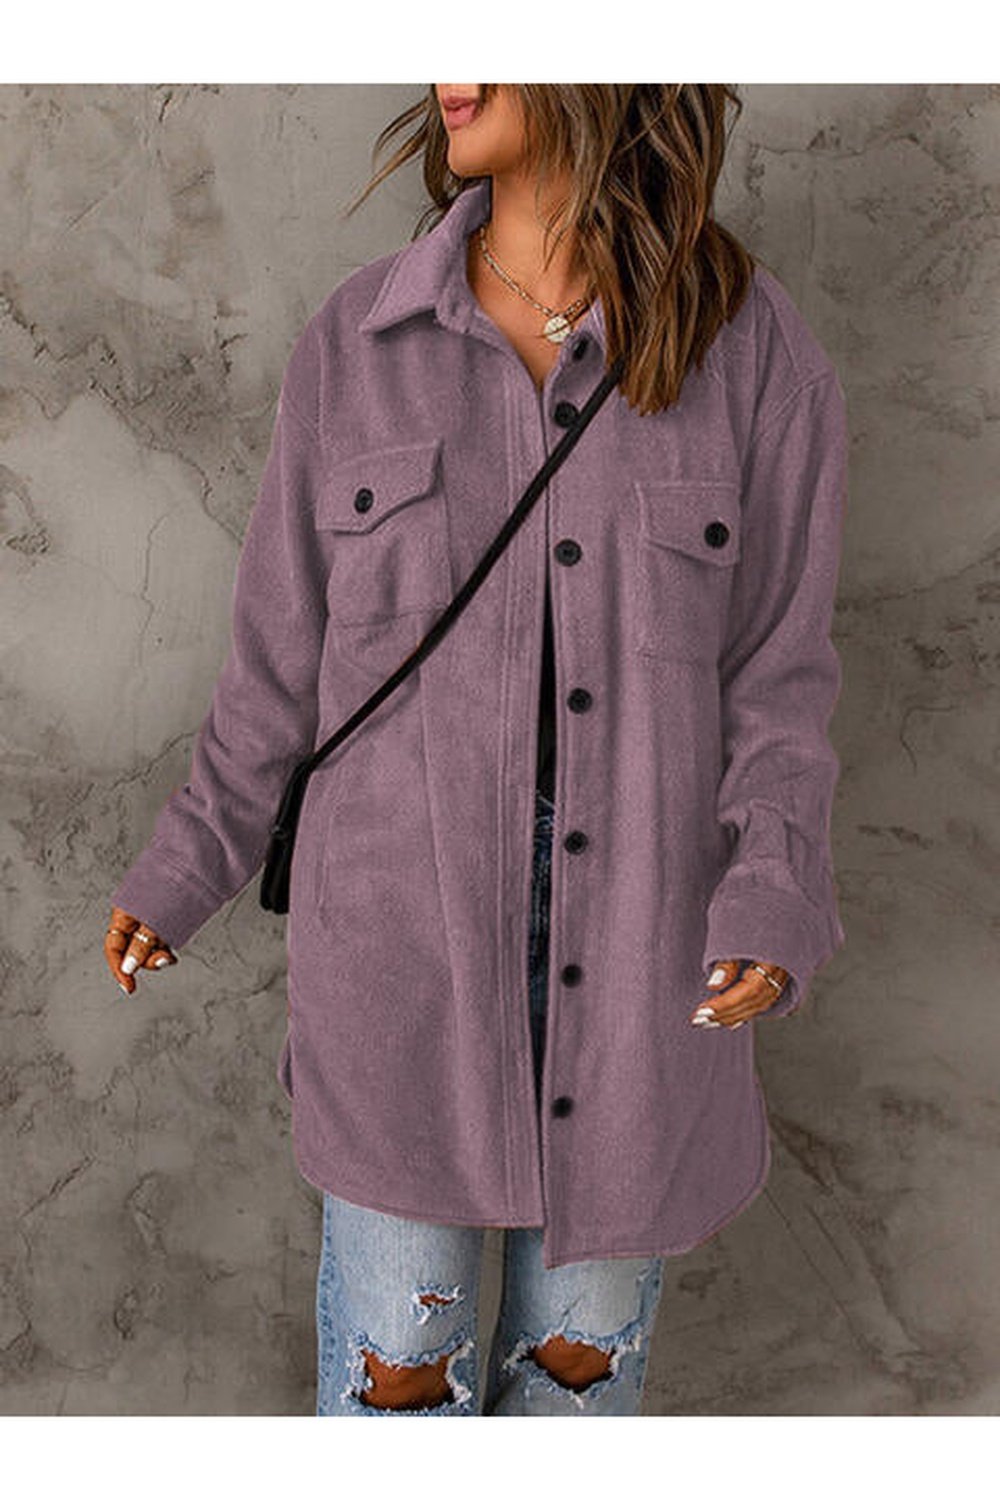 Drop Shoulder Button Down Collared Coat - Jackets - FITGGINS